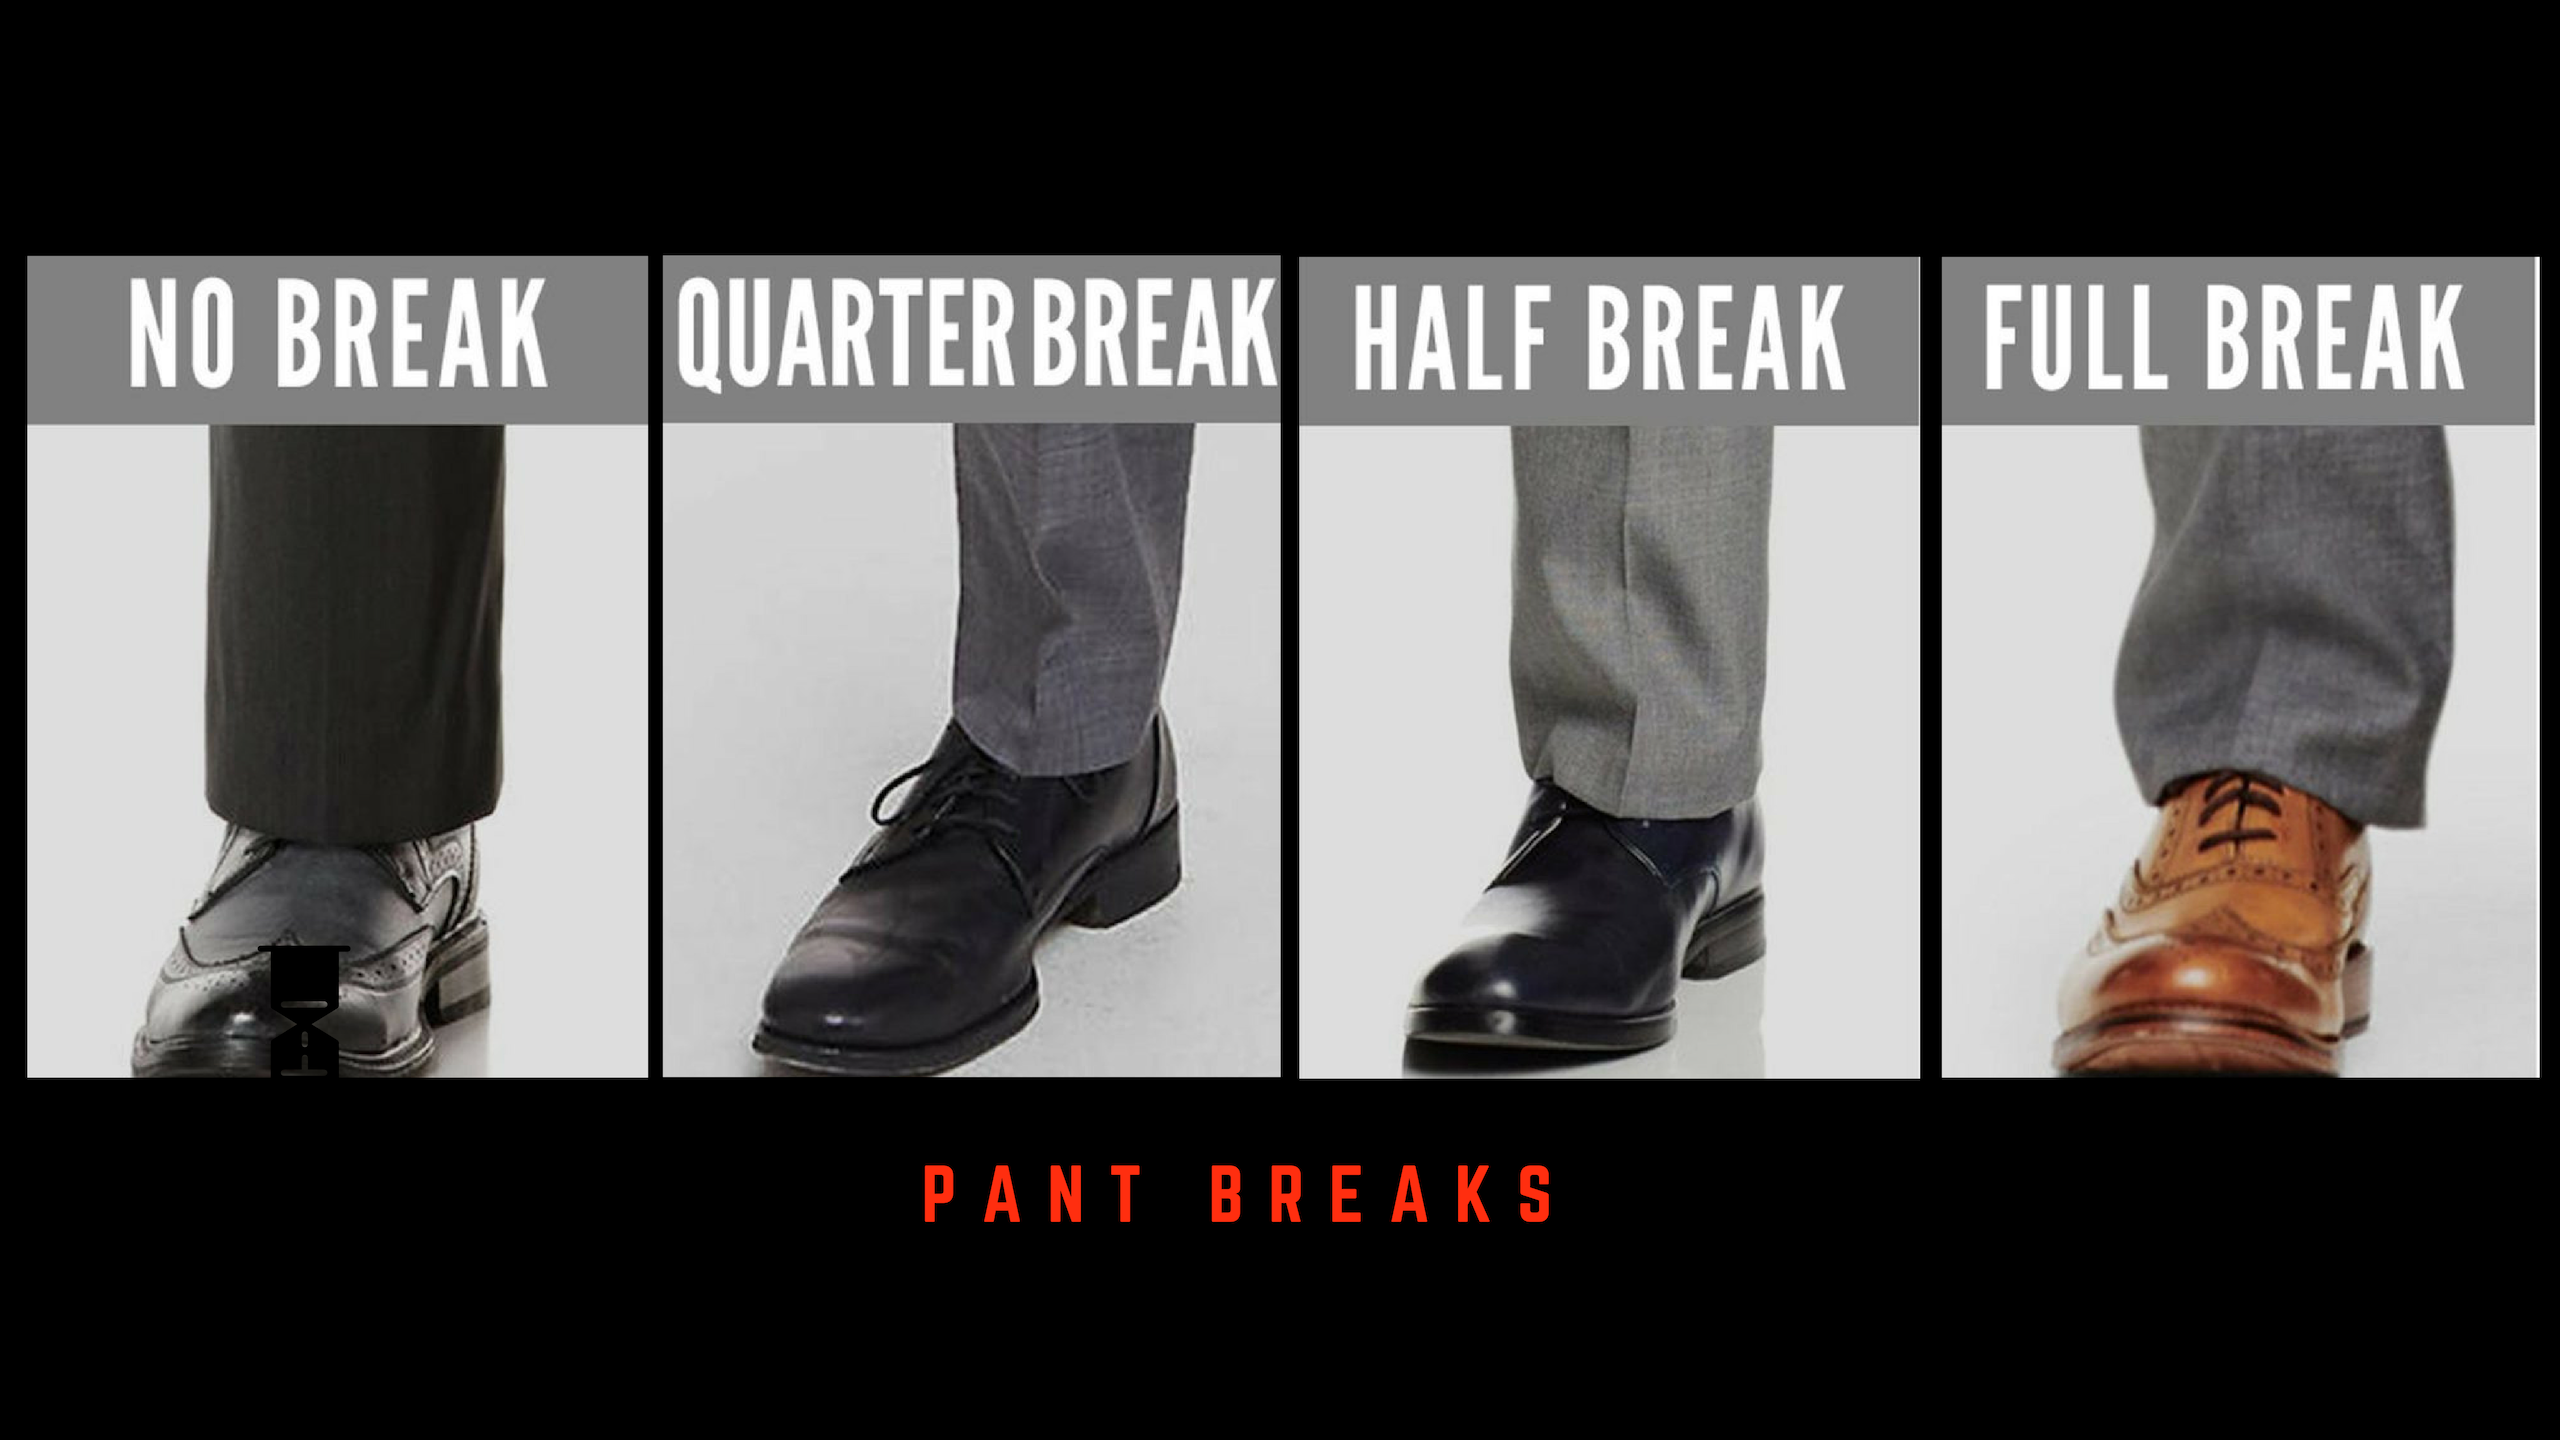 It’s time for a (pant) Break!. You must have noticed some men wearing ...